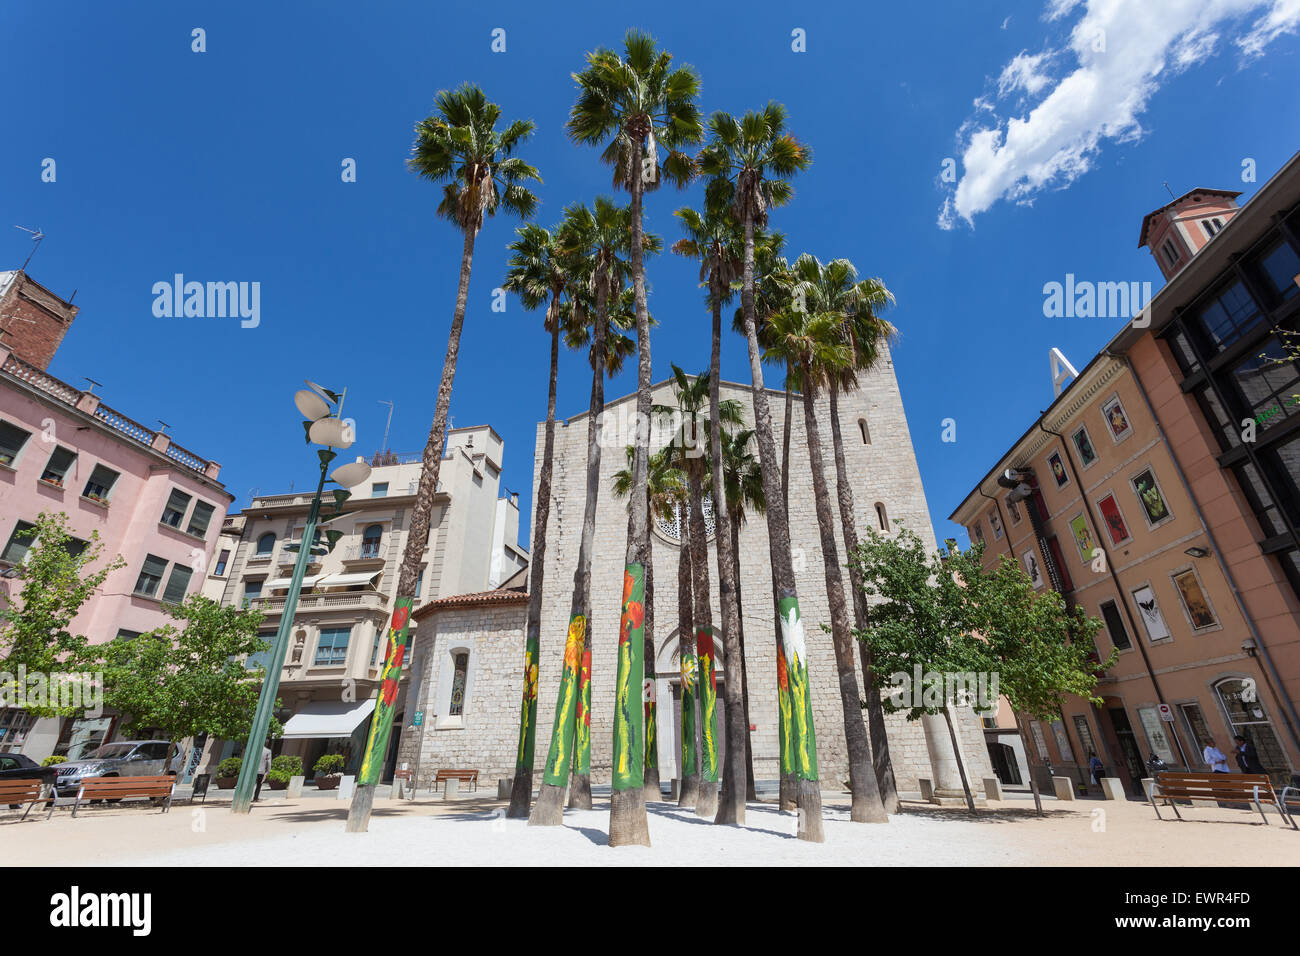 Palm trees in the old town of Girona, Catalonia, Spain Stock Photo